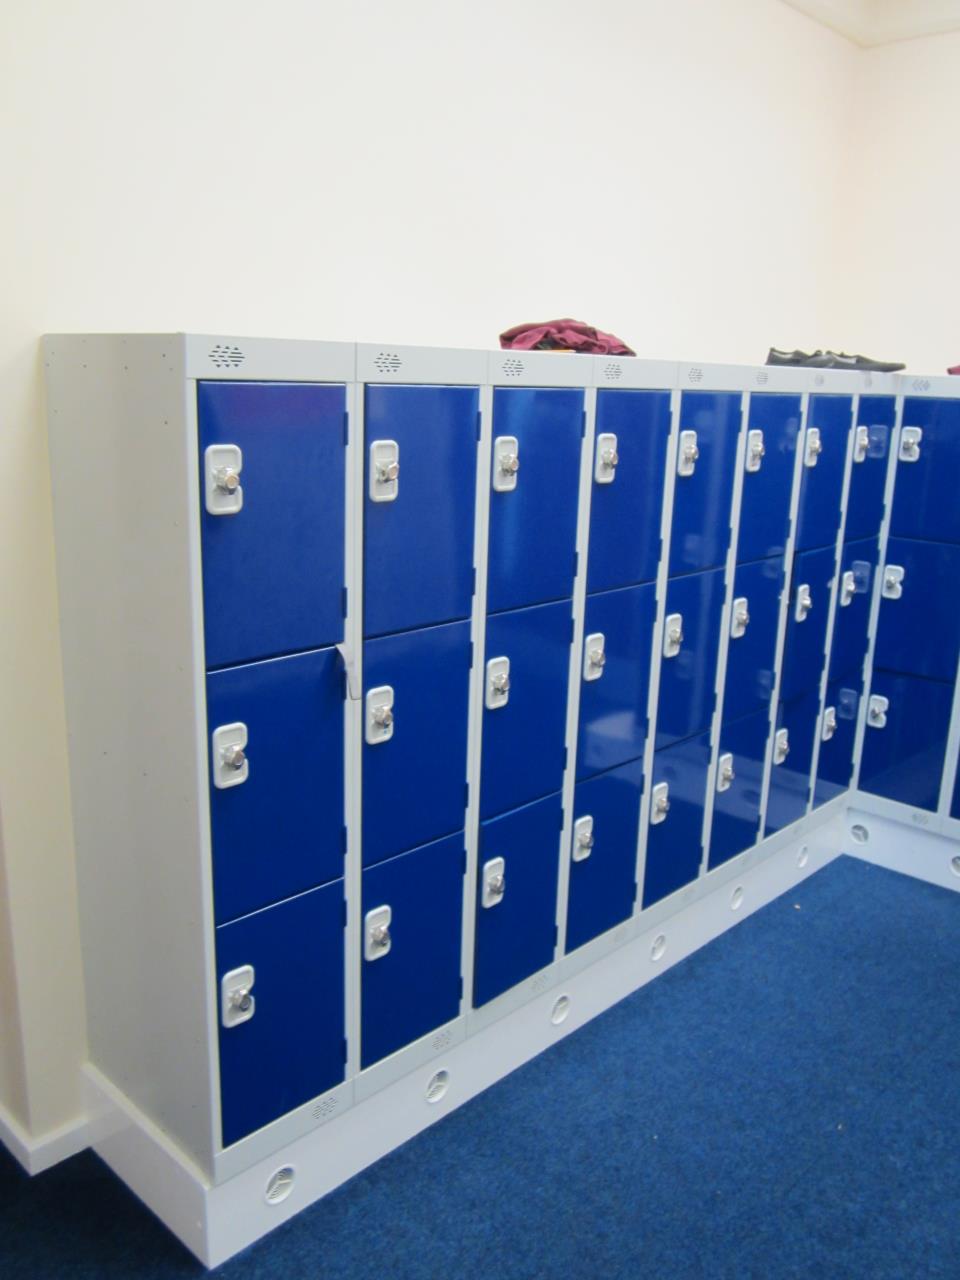 Low Lockers at Thornhill School, West Yorkshire